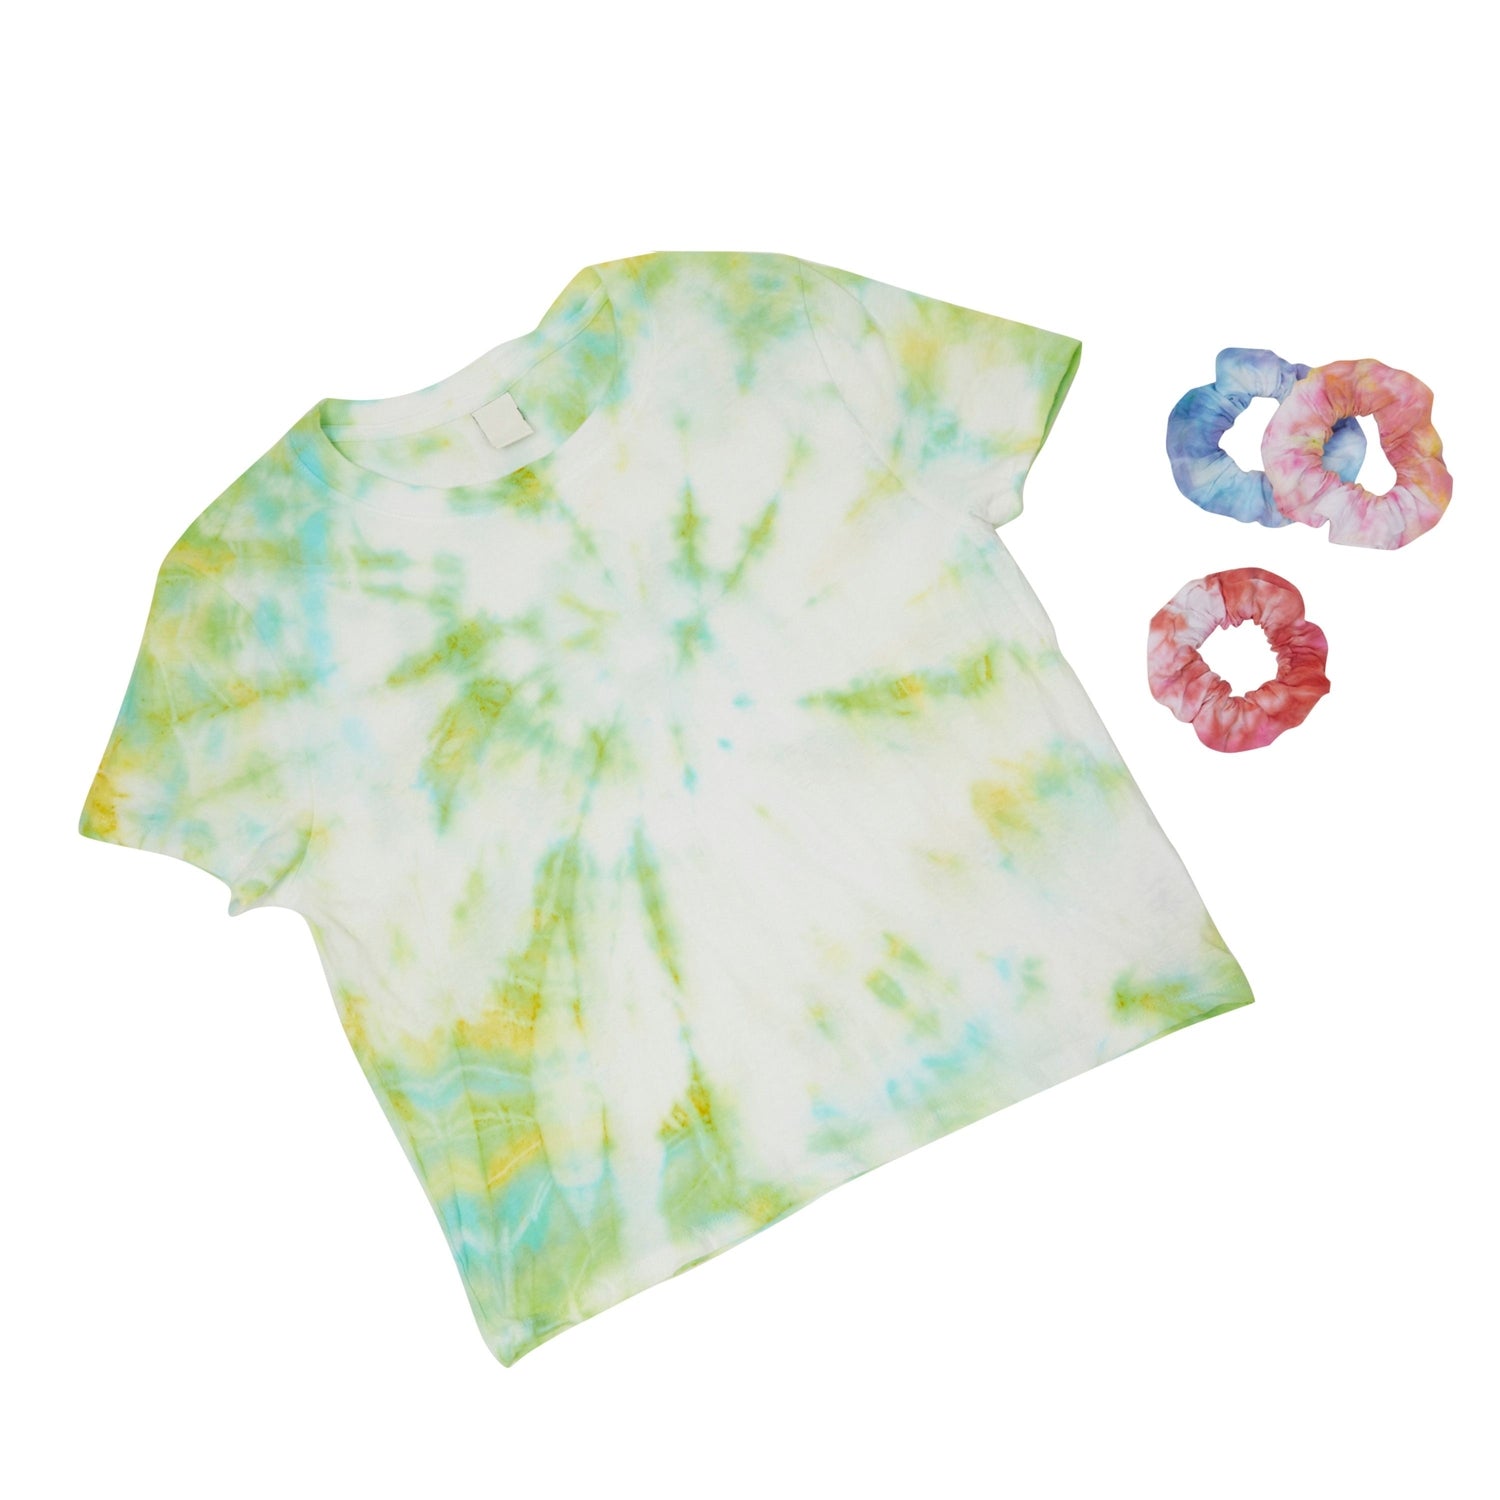 Tie Dye Kit with 26 Colors, Aprons, and Gloves, Tie Dye for DIY Fabric –  BrightCreationsOfficial